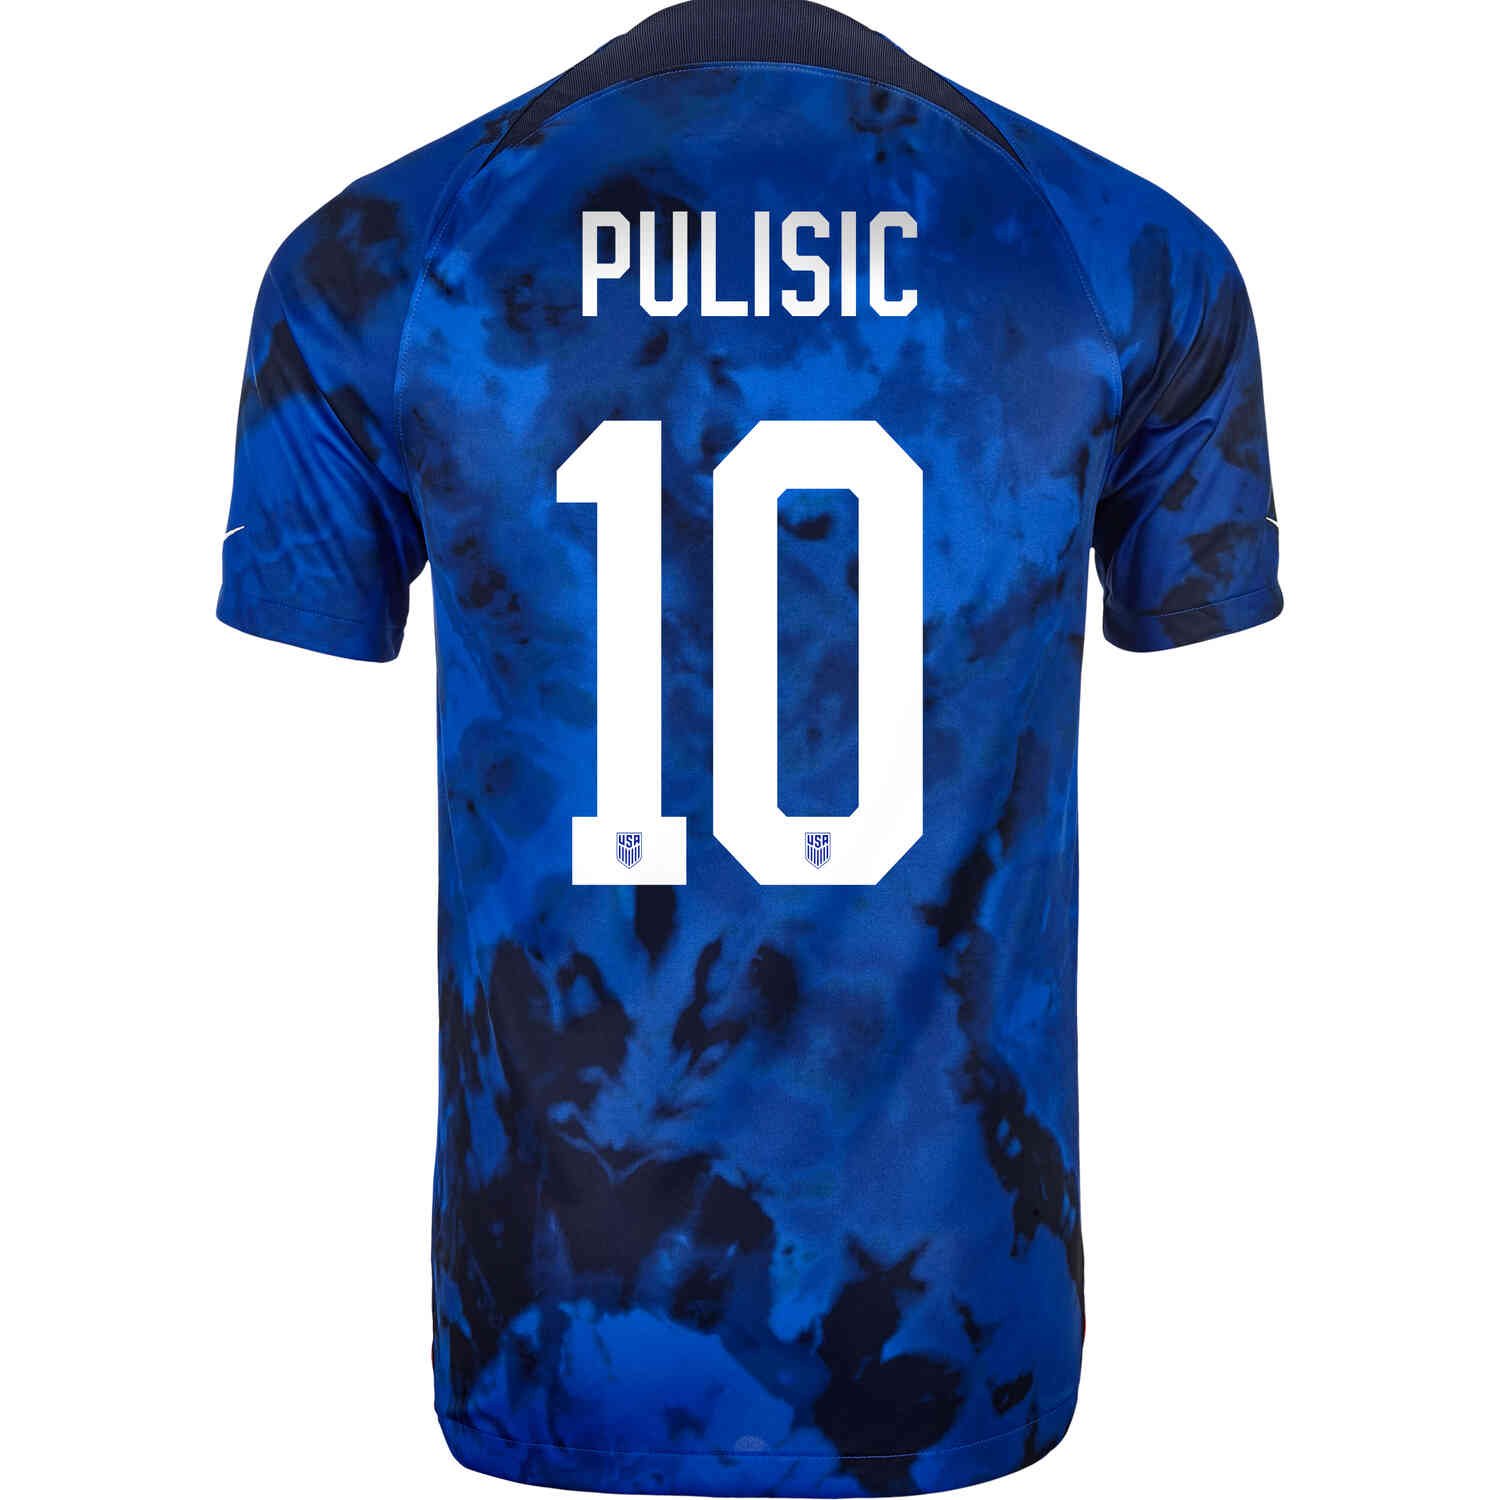 The Top 10 Jerseys of 2022 - The Center Circle - A SoccerPro